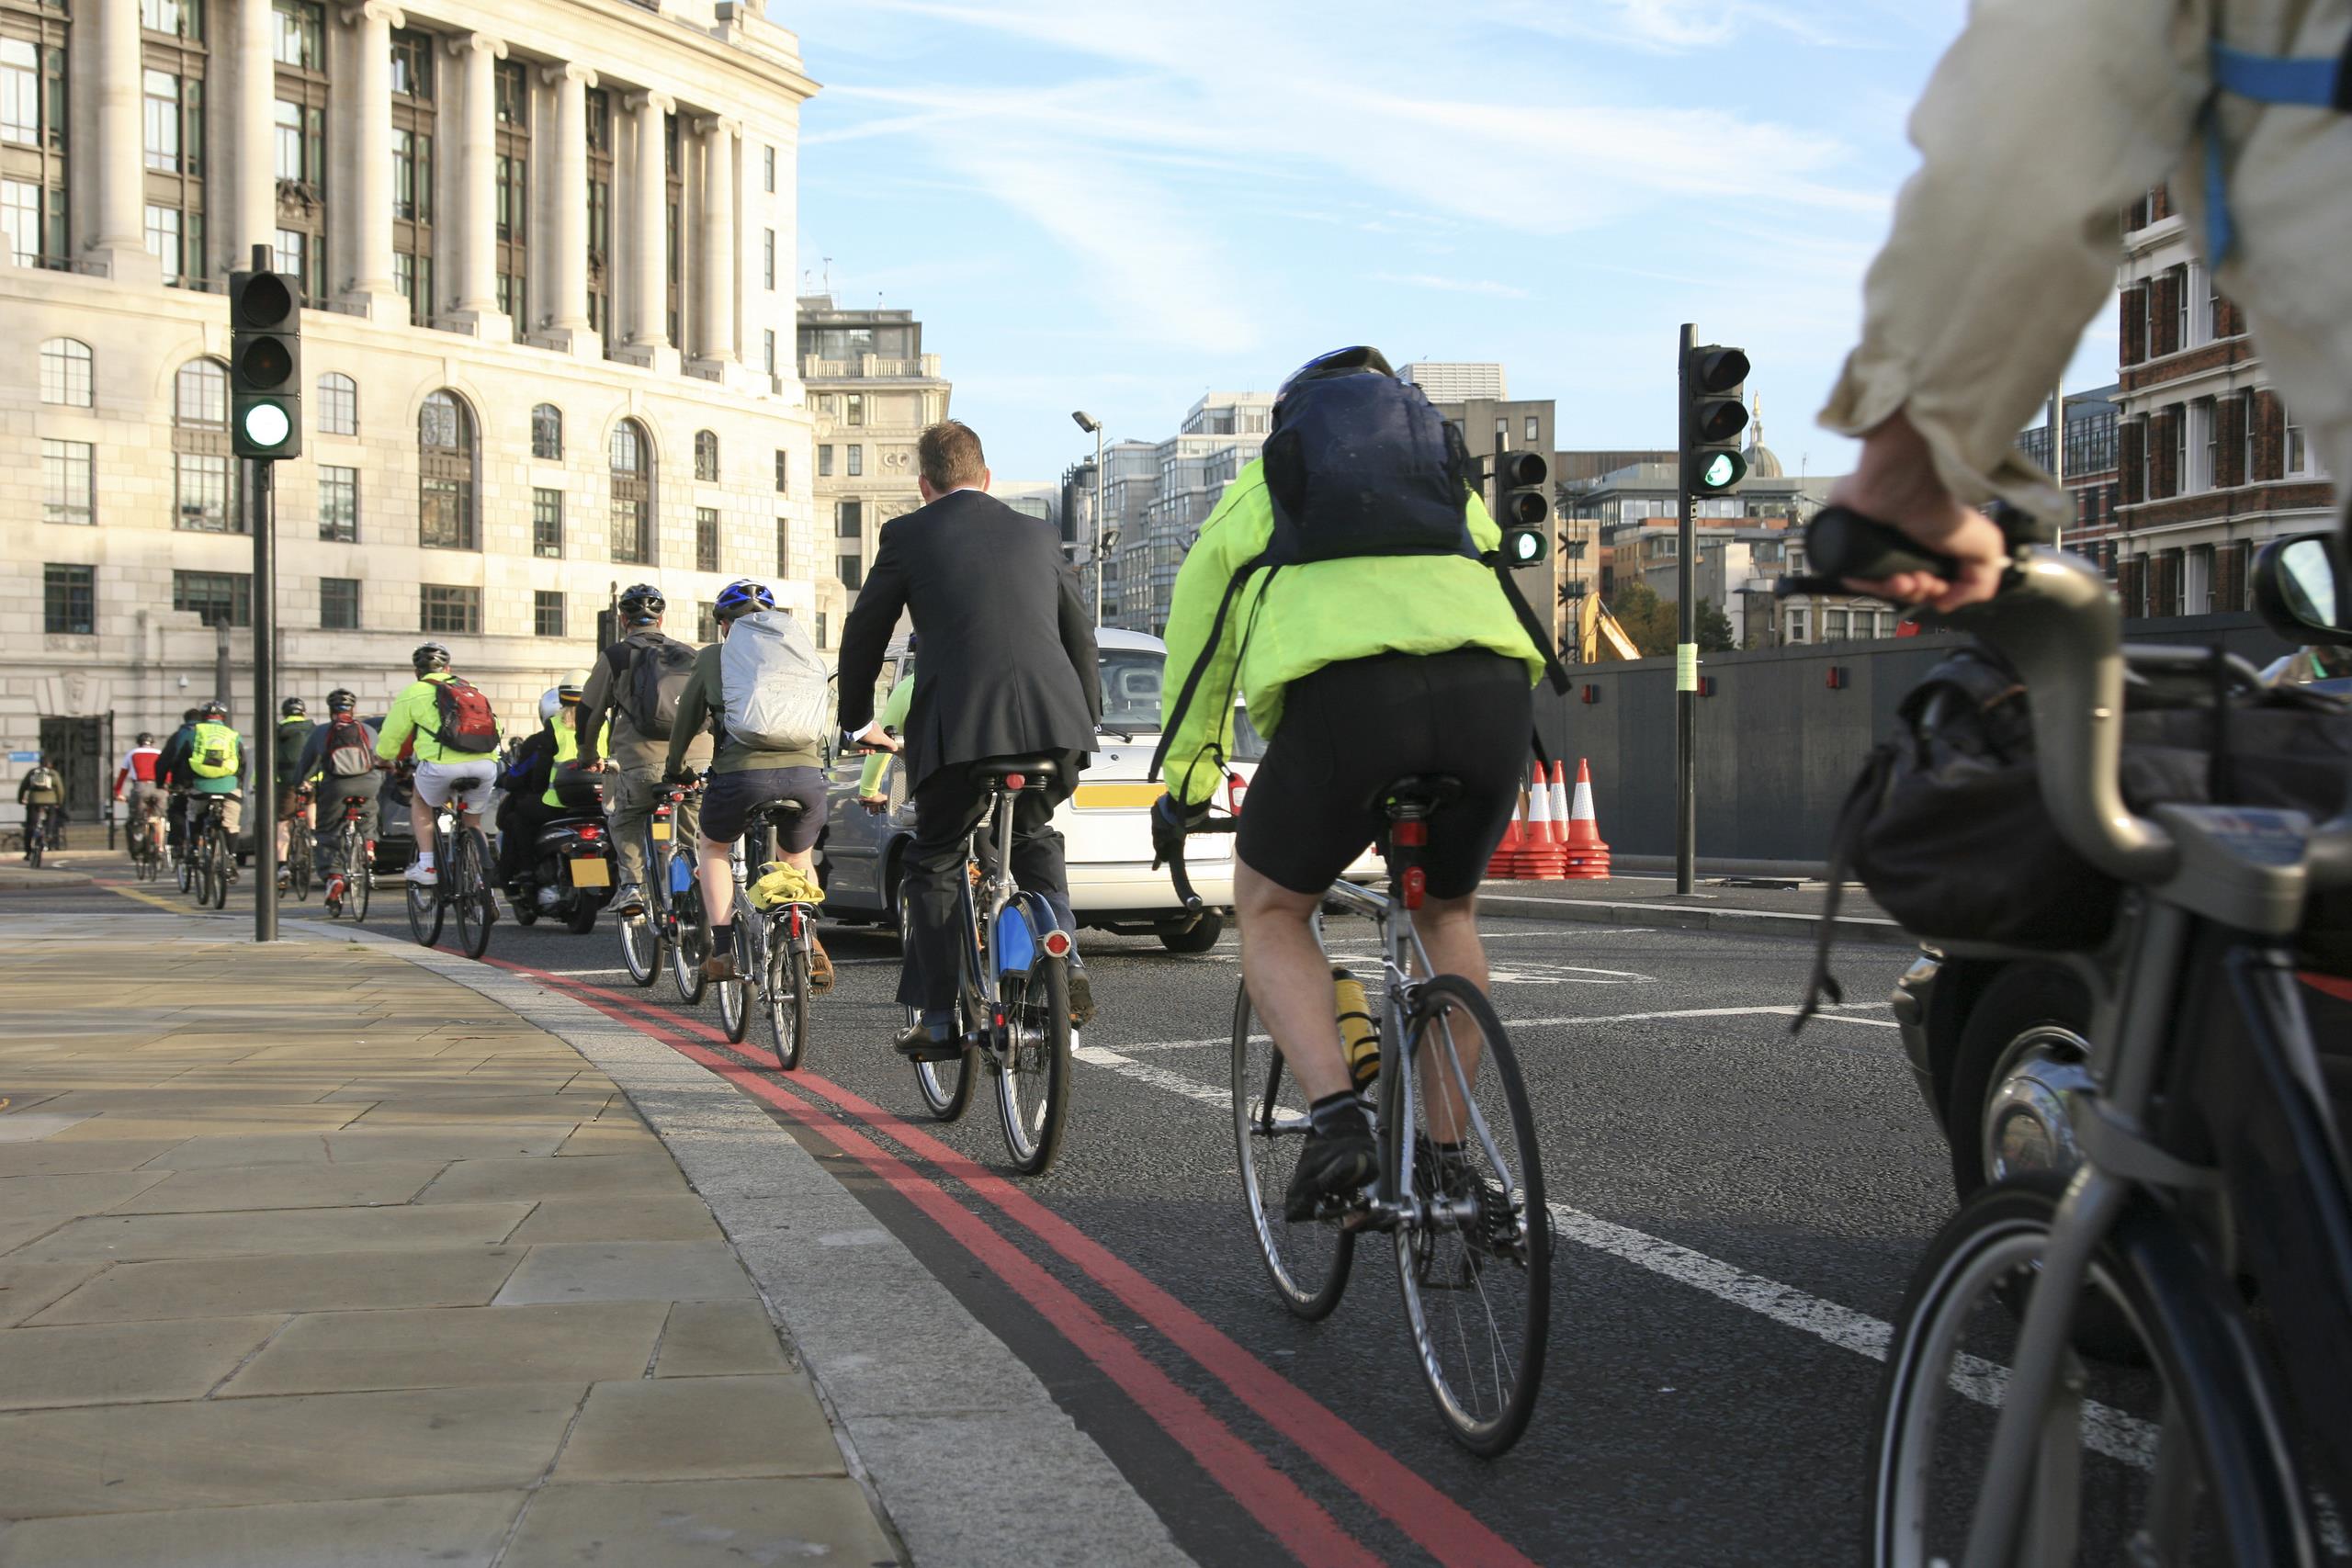 Cyclists commuting to work in London